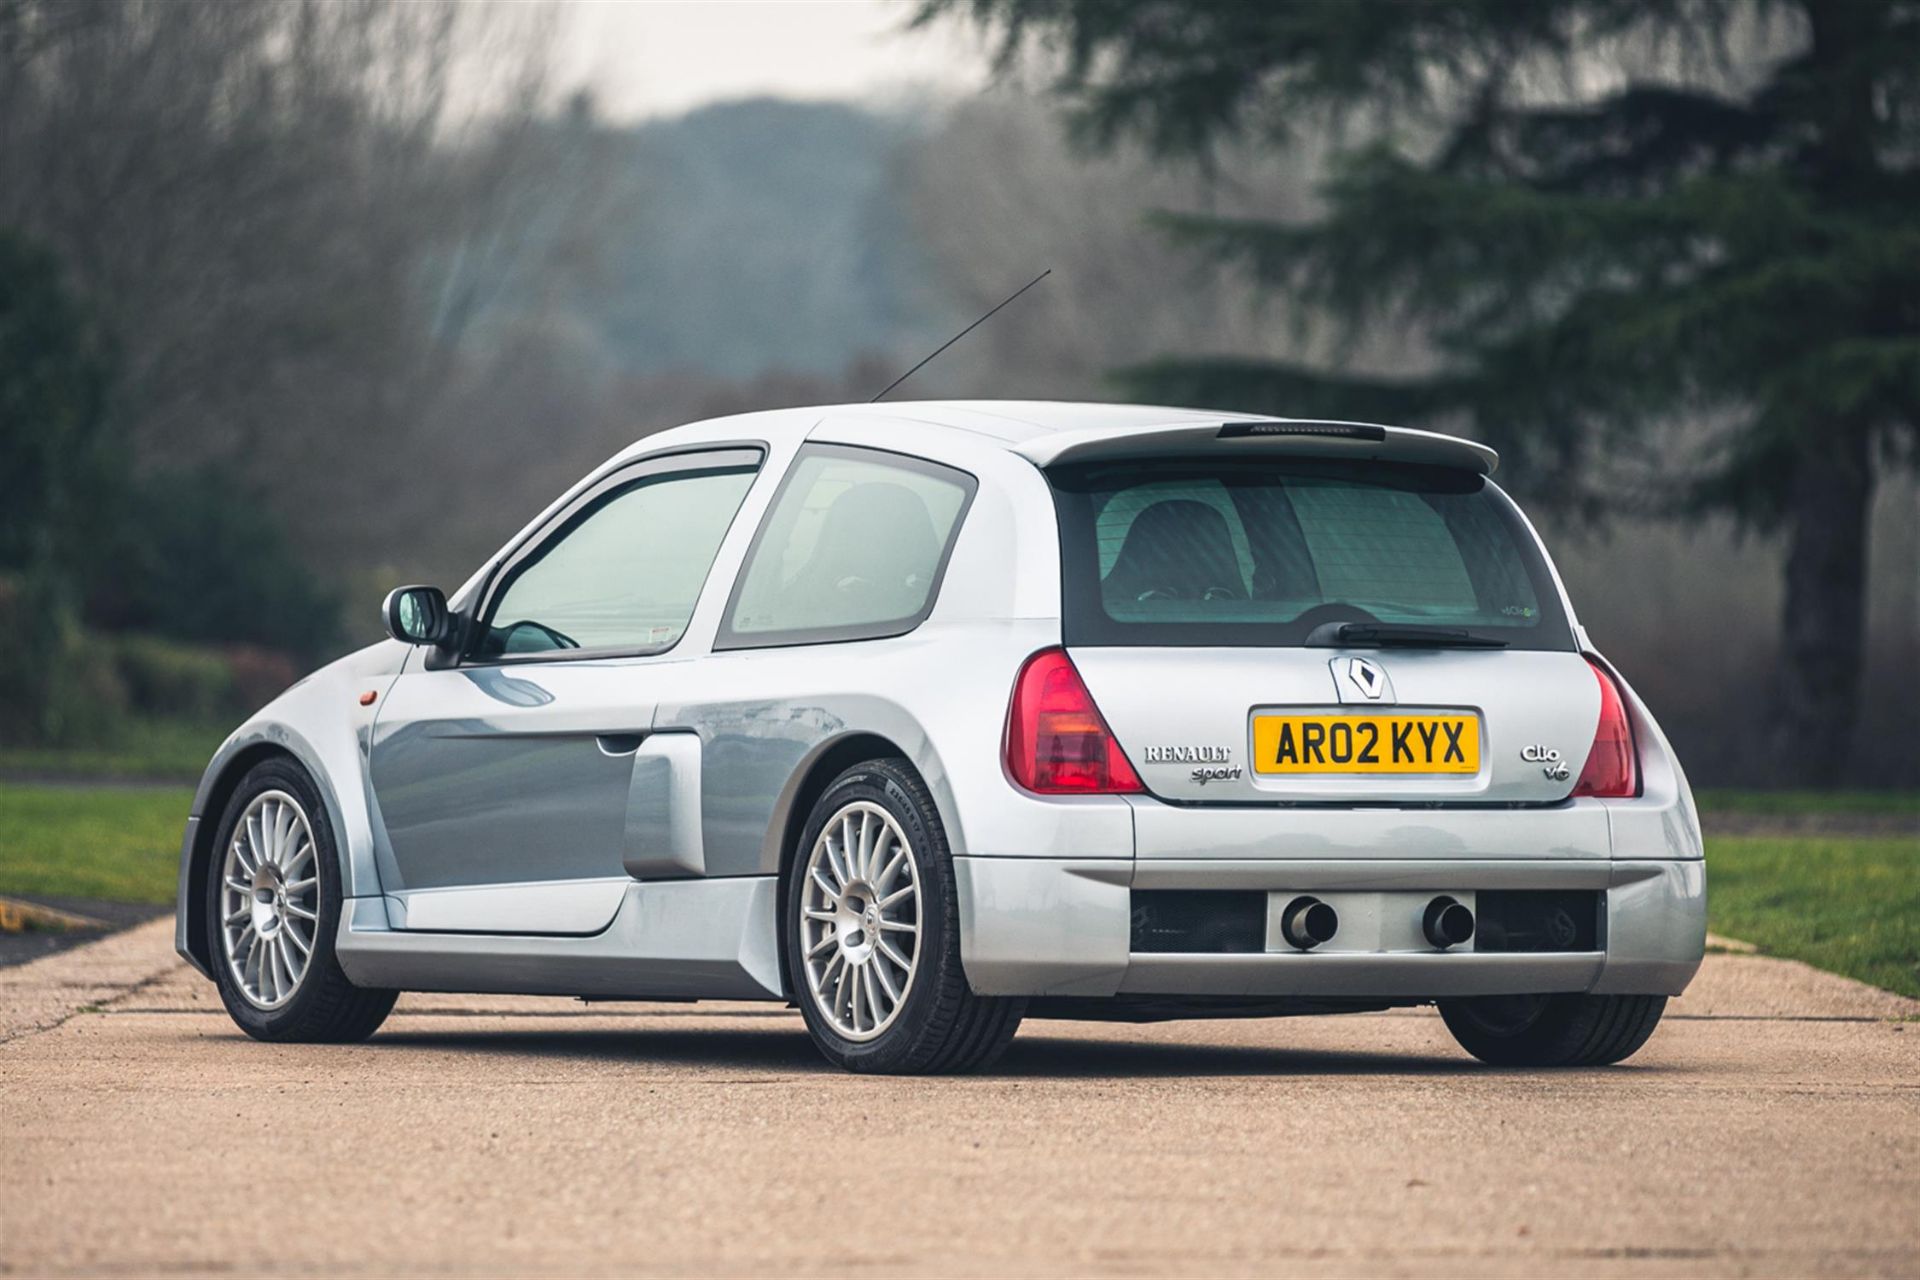 2002 Renault Sport Clio V6 (230) Phase 1 - Image 4 of 10